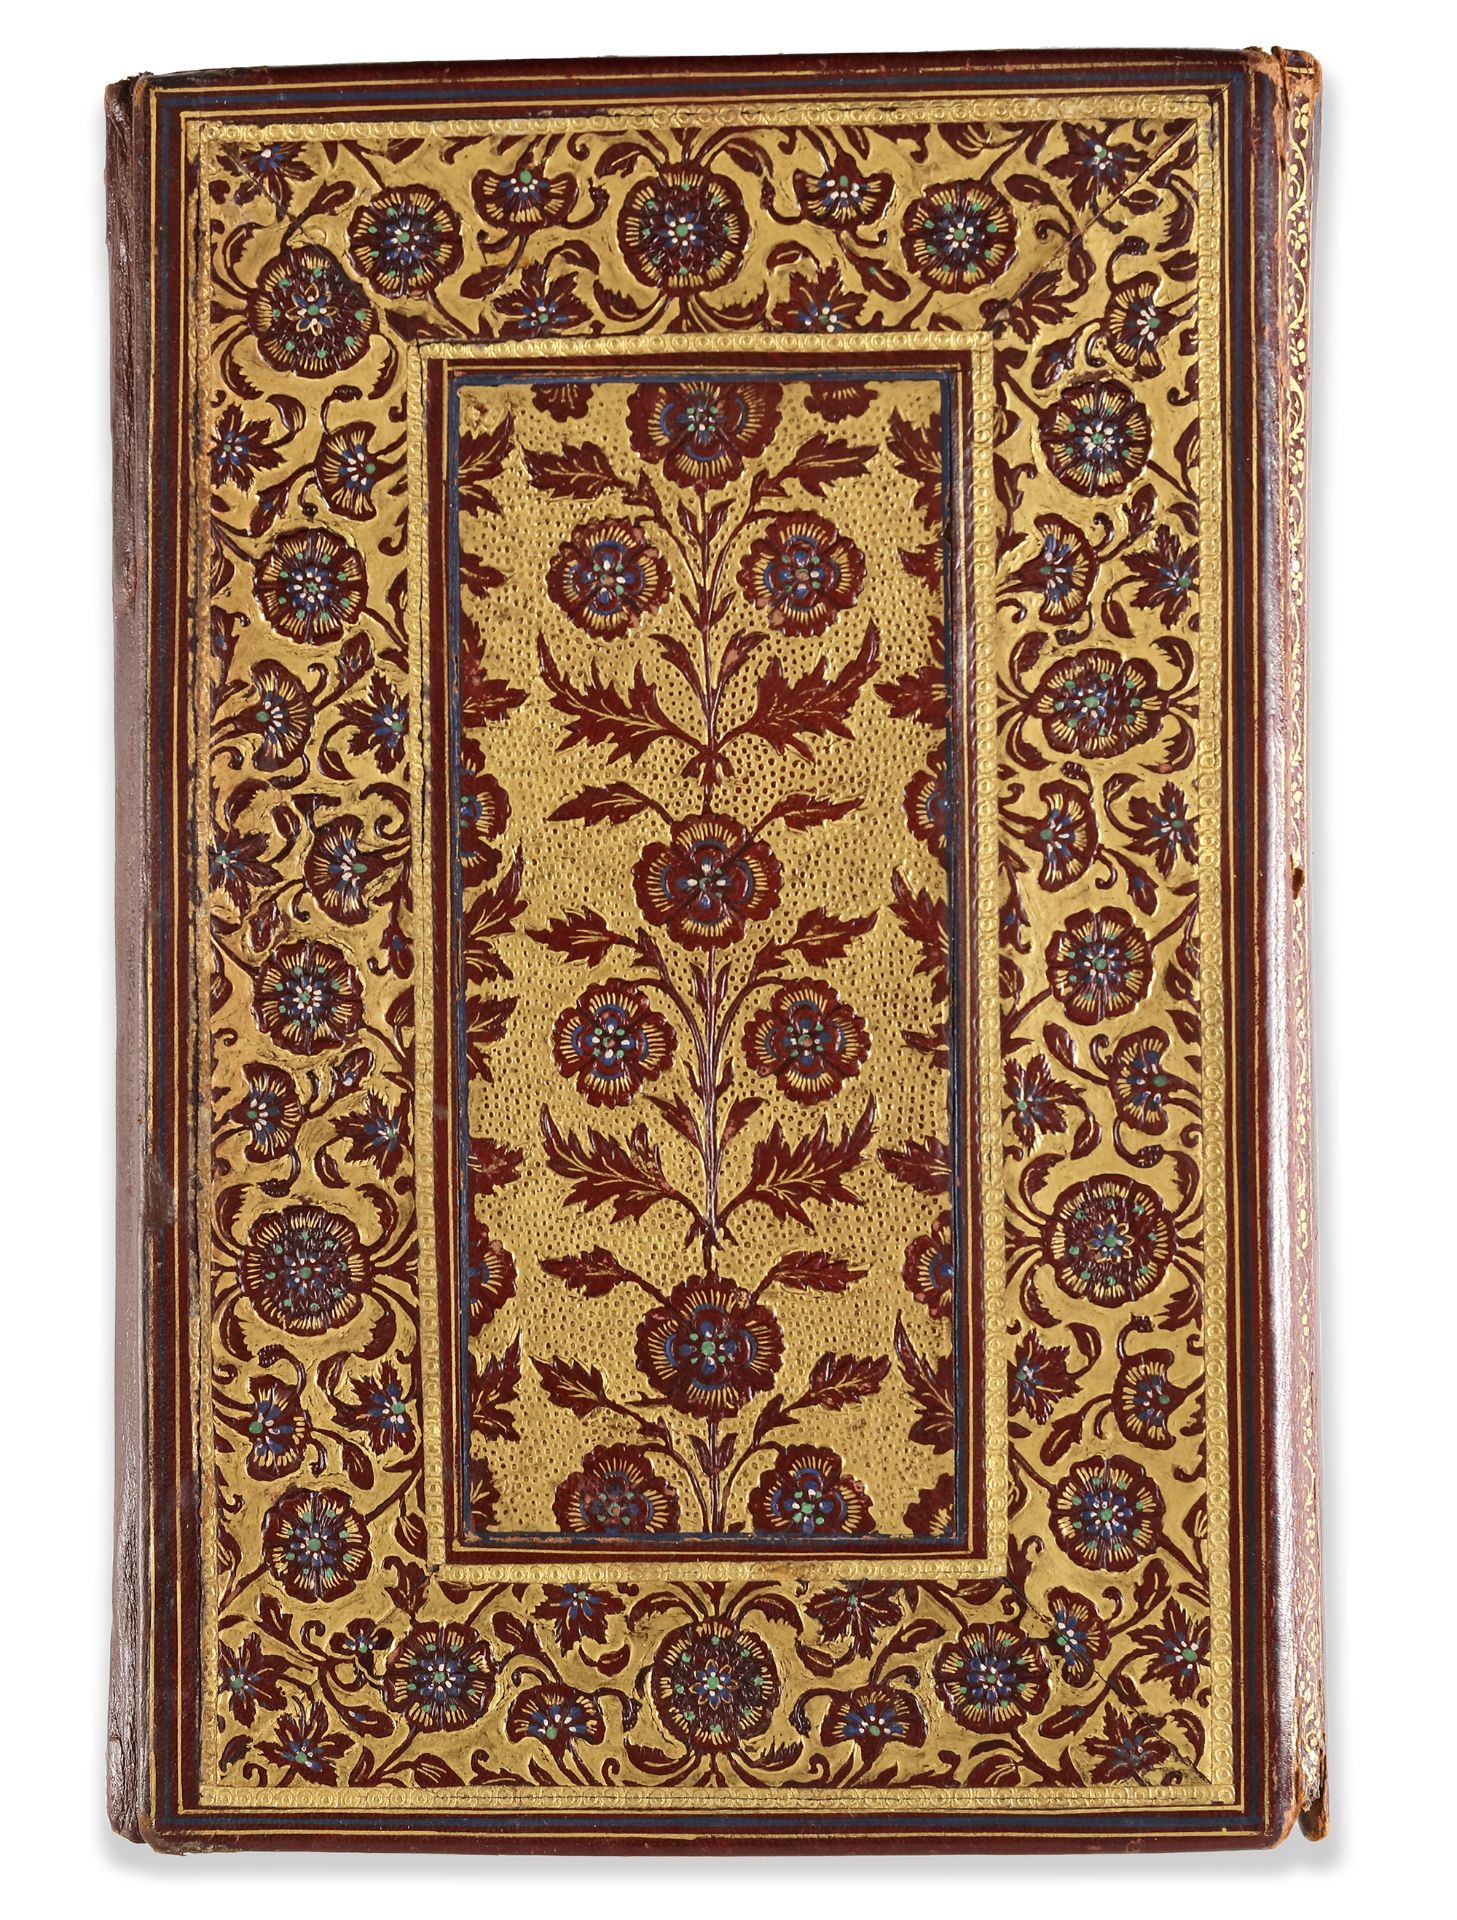 A FINELY ILLUMINATED QURAN, CENTRAL ASIA, 18TH CENTURY - Image 8 of 8